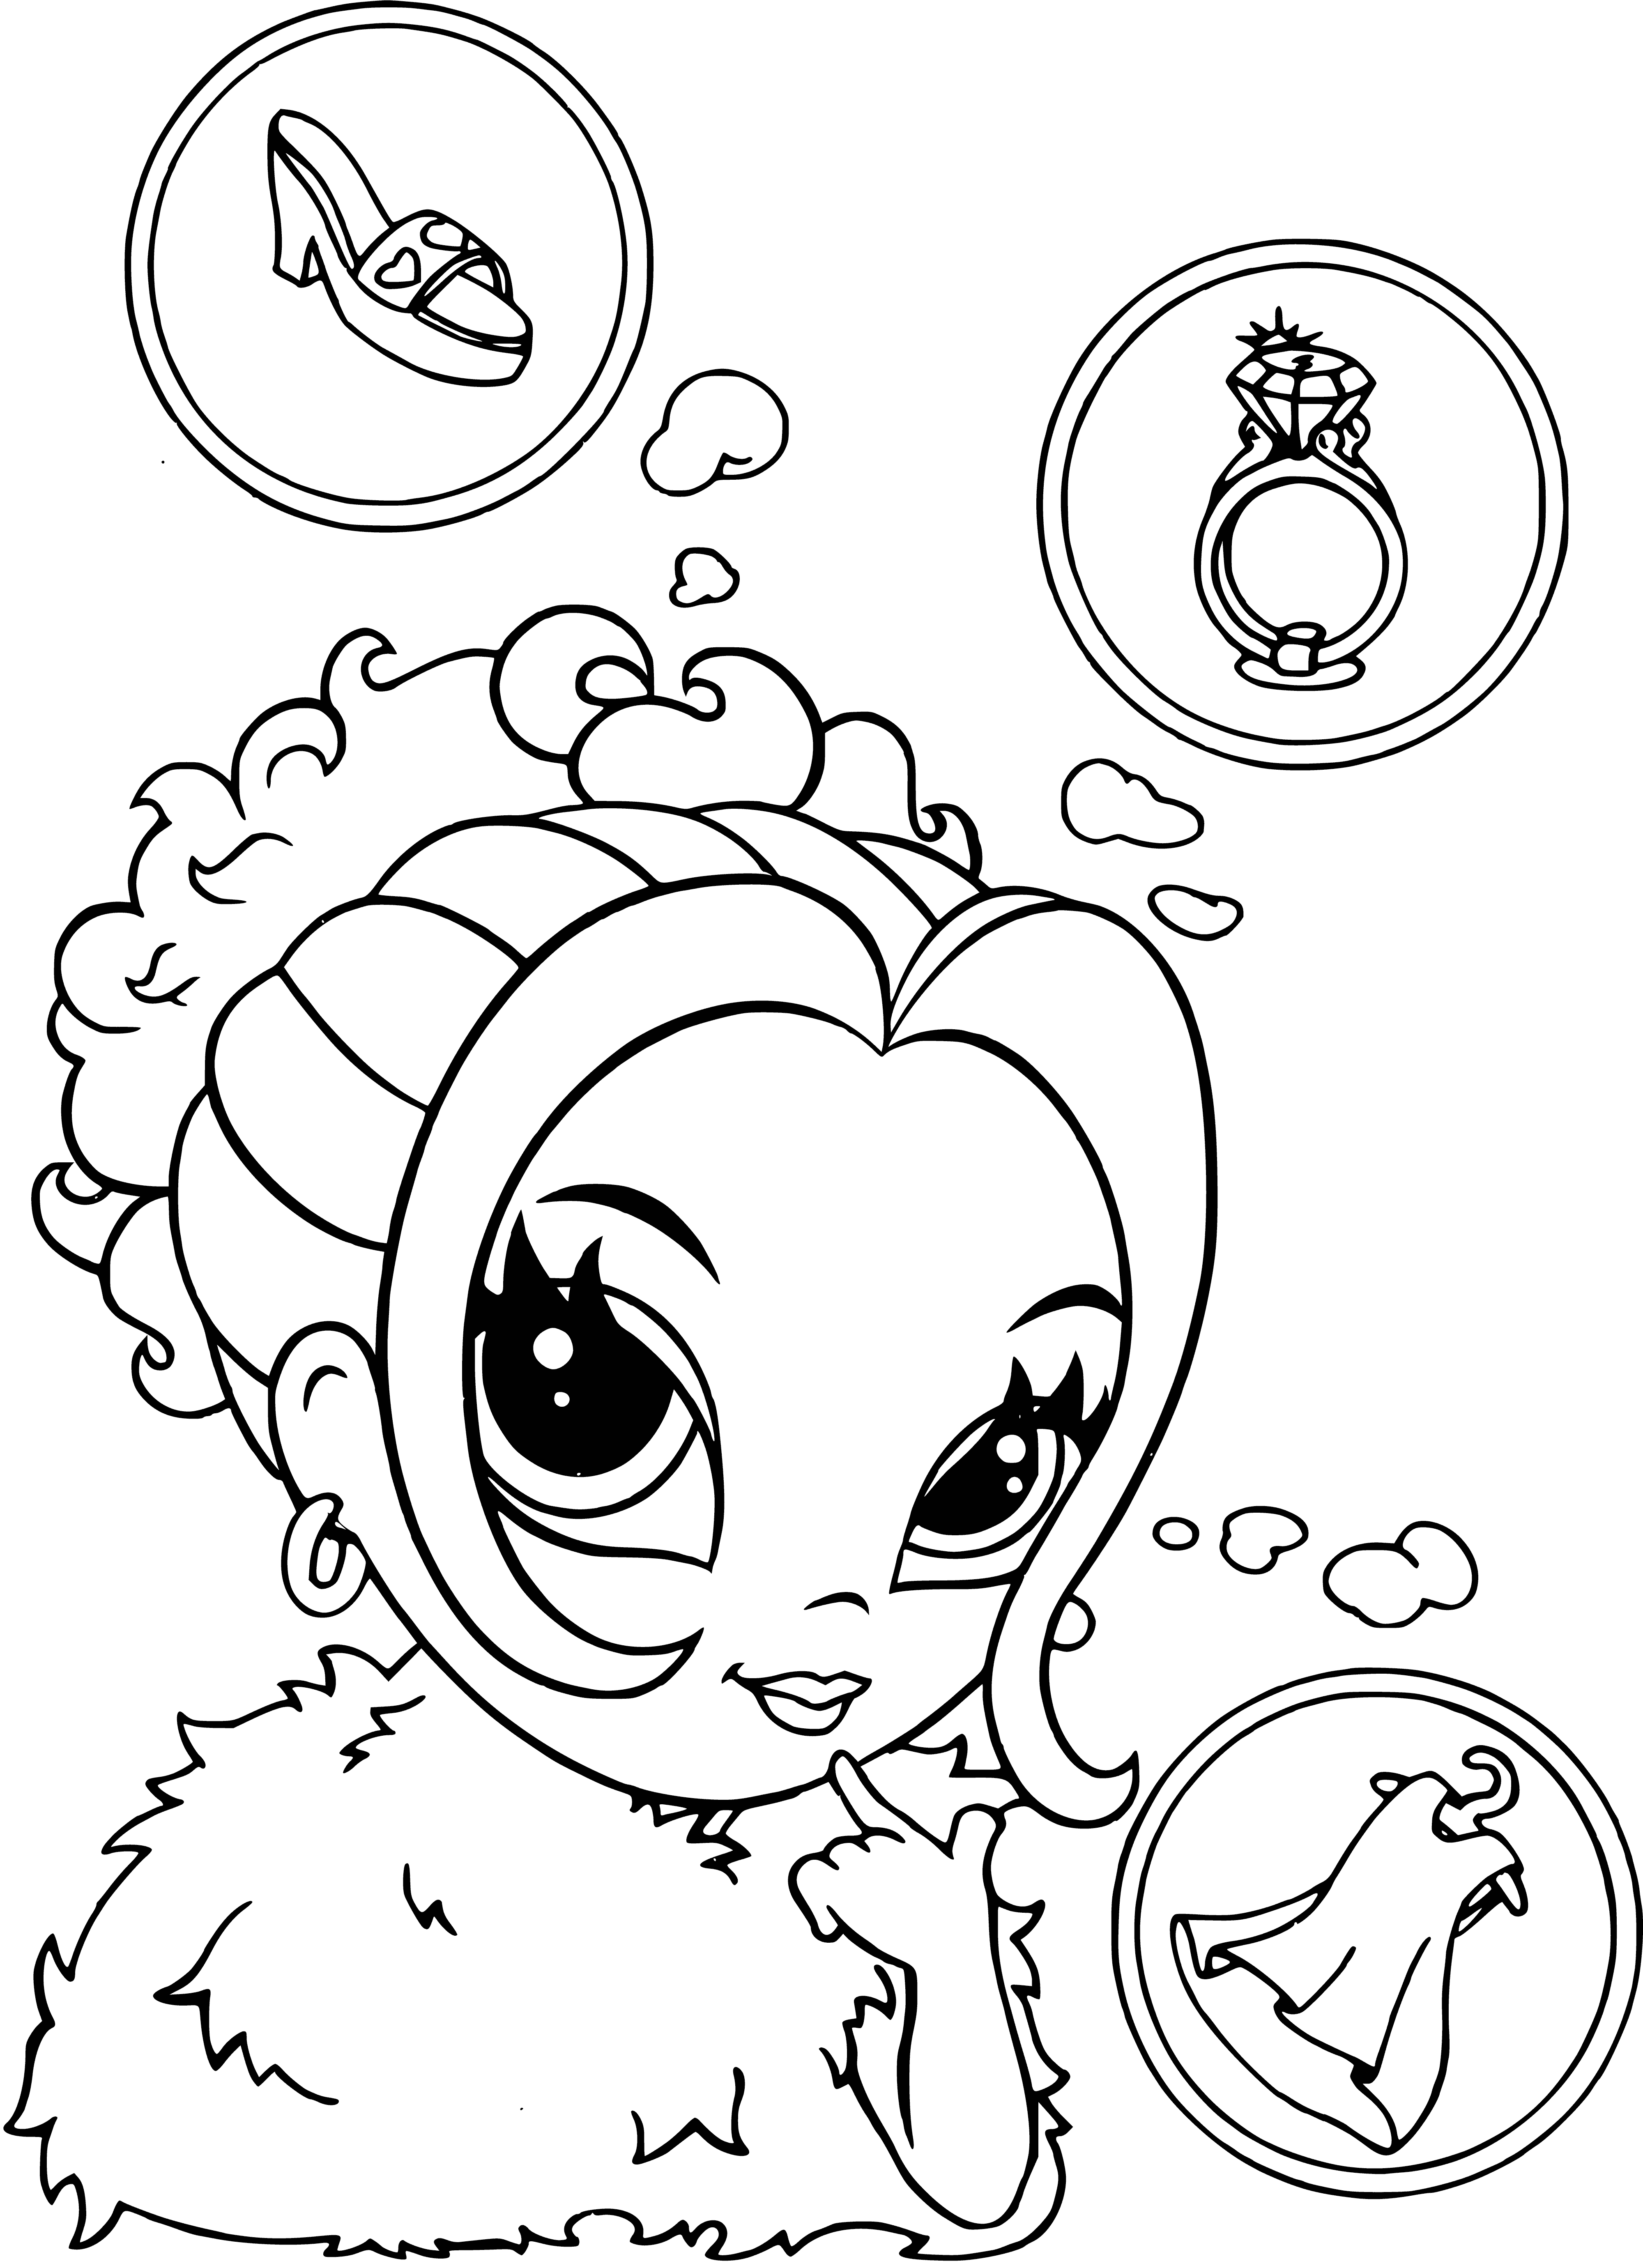 coloring page: A cheerful, confident girl posing in a sparkly dress, glittery wings, and a gold background. #PrettyInPink